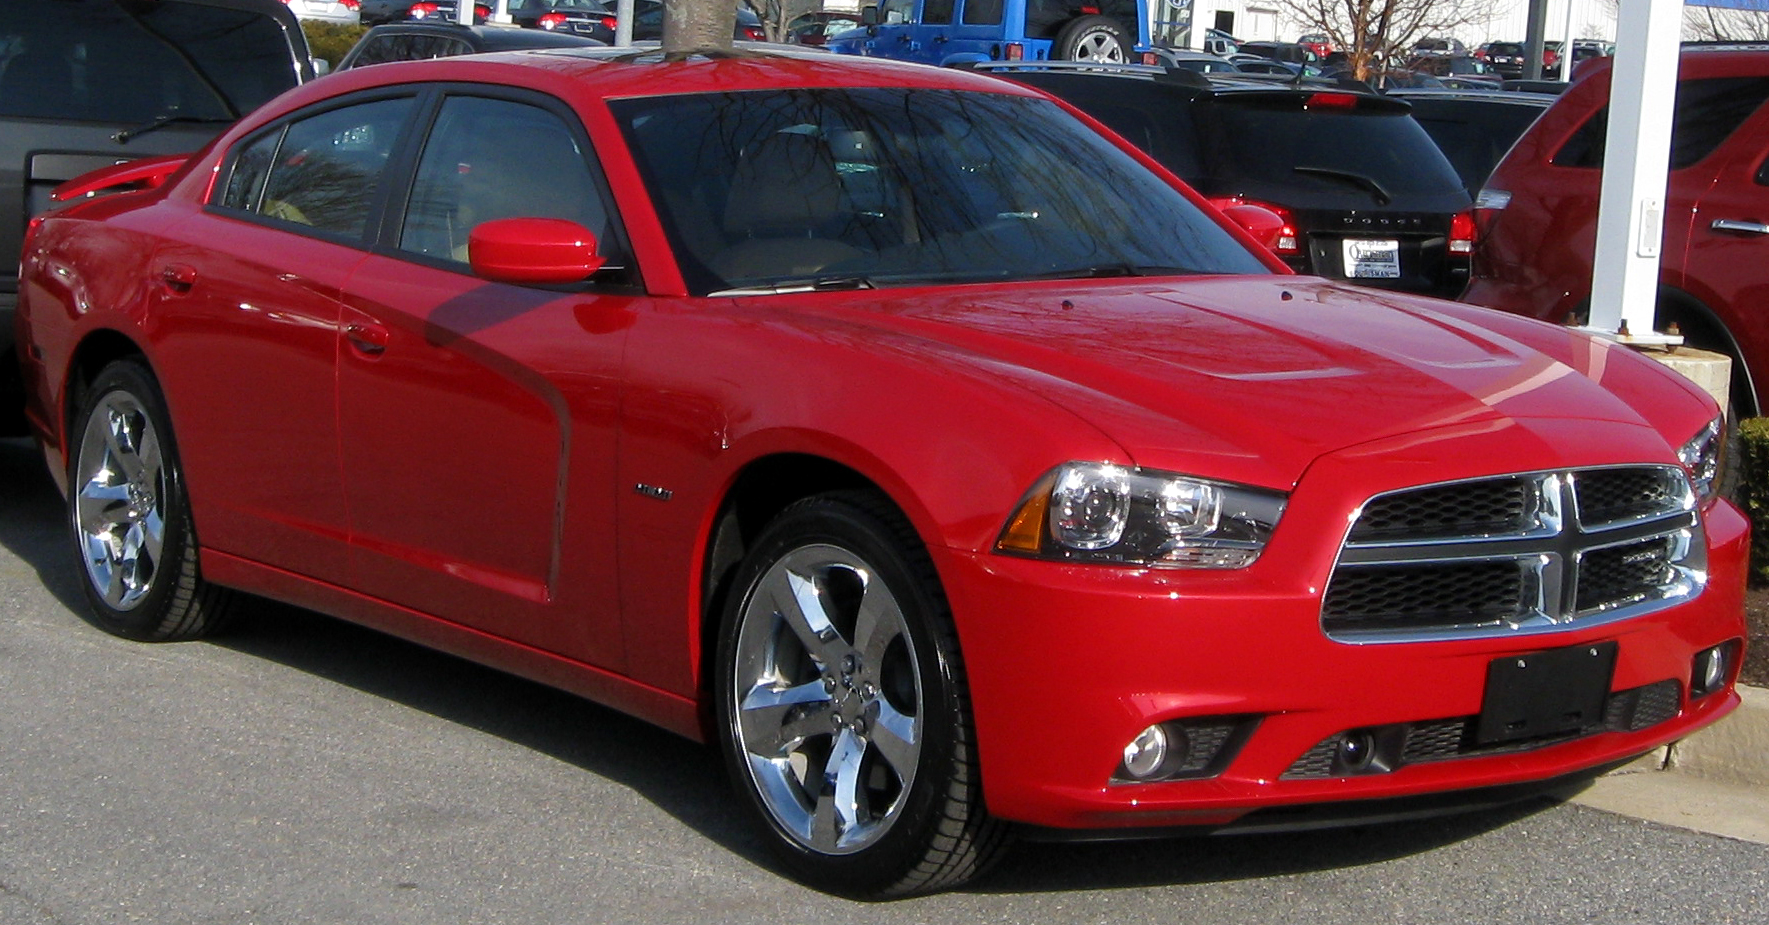 Dodge Charger Rentals Facing Rash Of Thefts In Hawaii